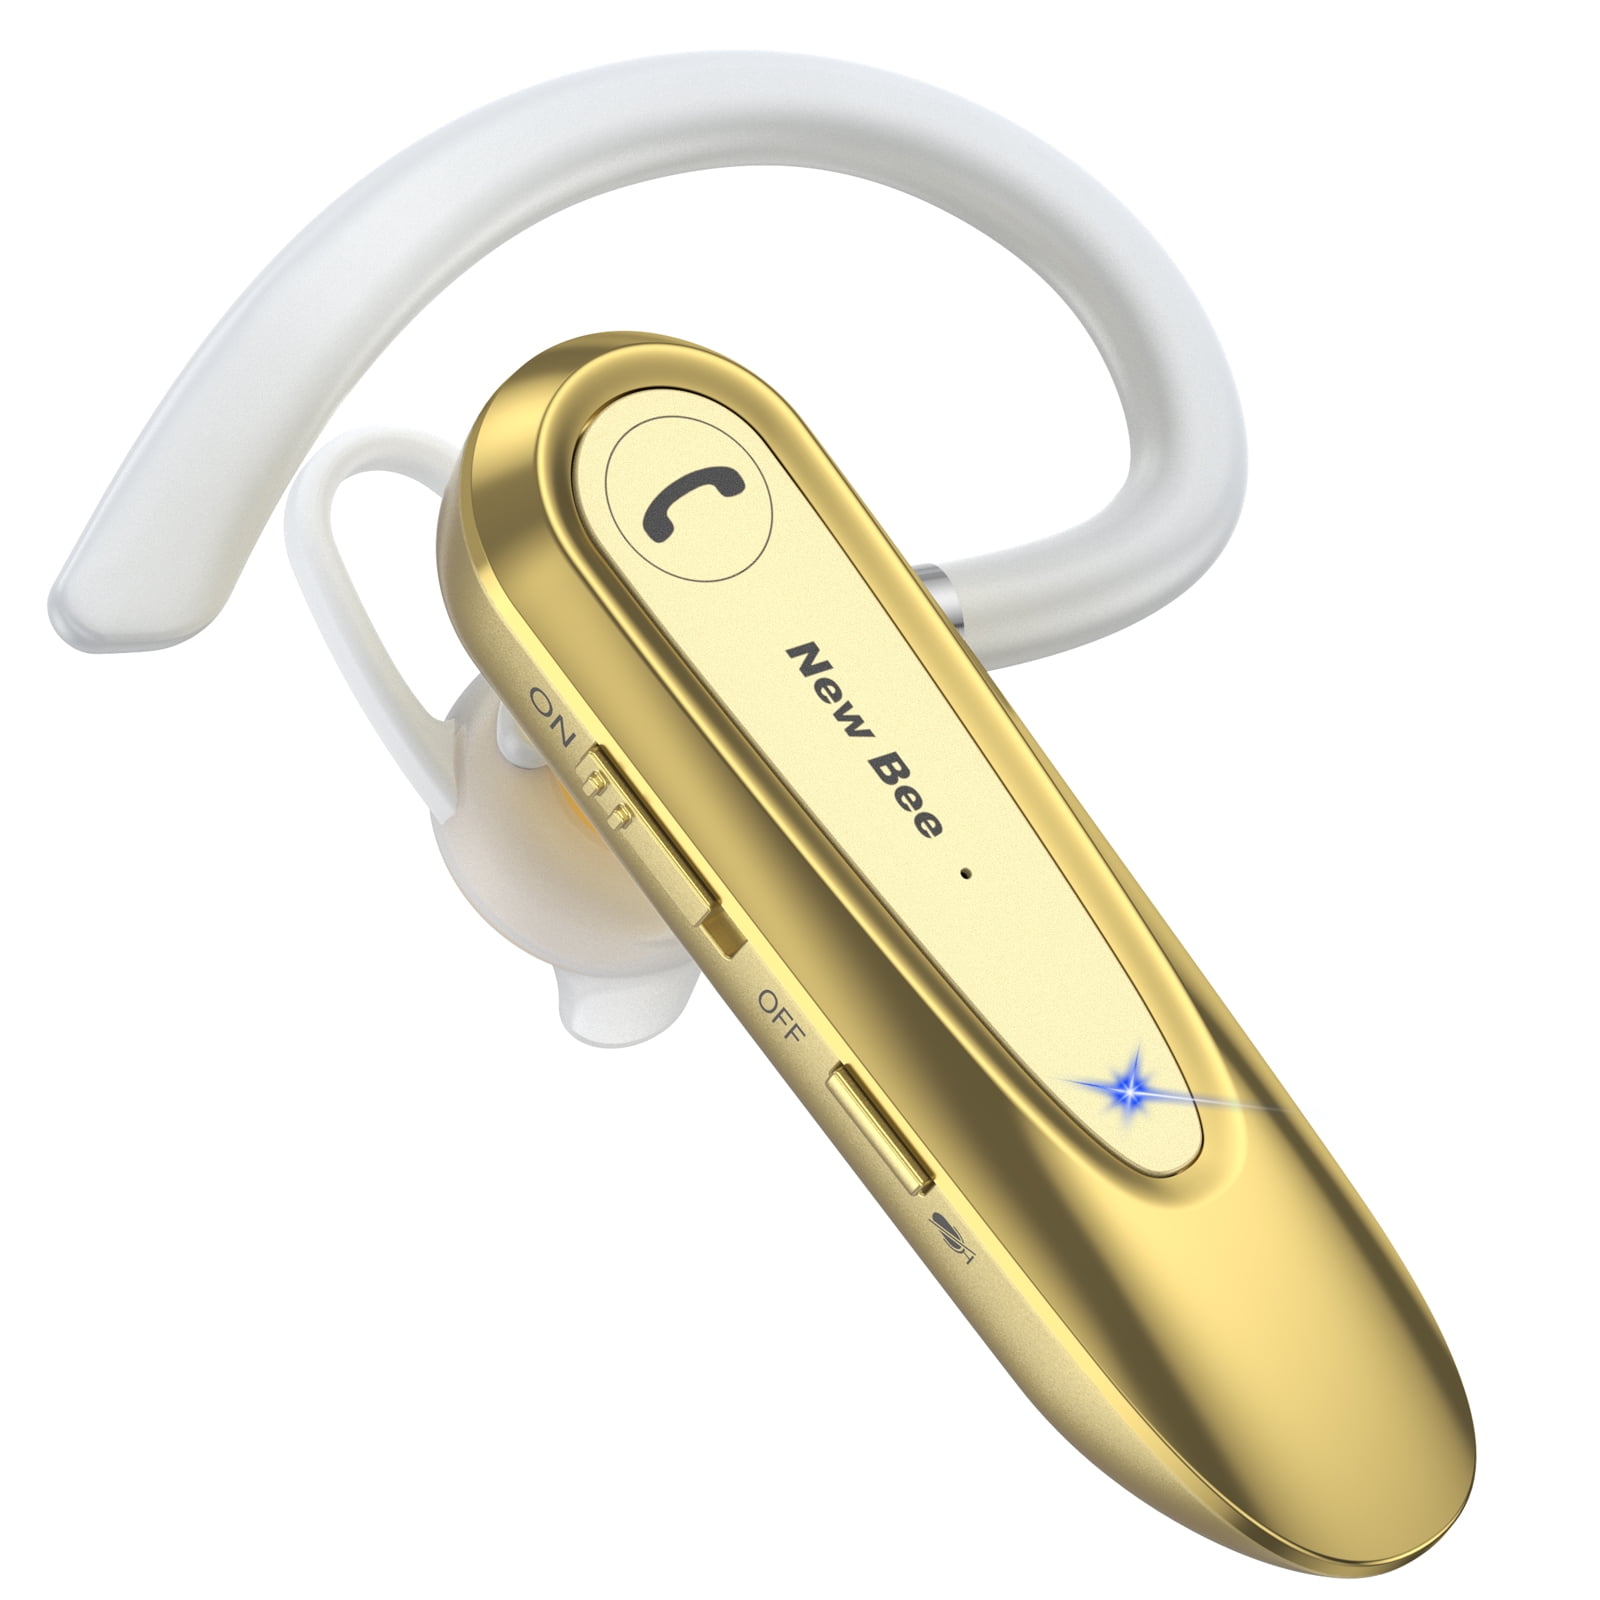 New Bee Bluetooth Headset W/Mic Wireless Earpiece in-Ear Business Earbuds  for iOS Android Cellphone